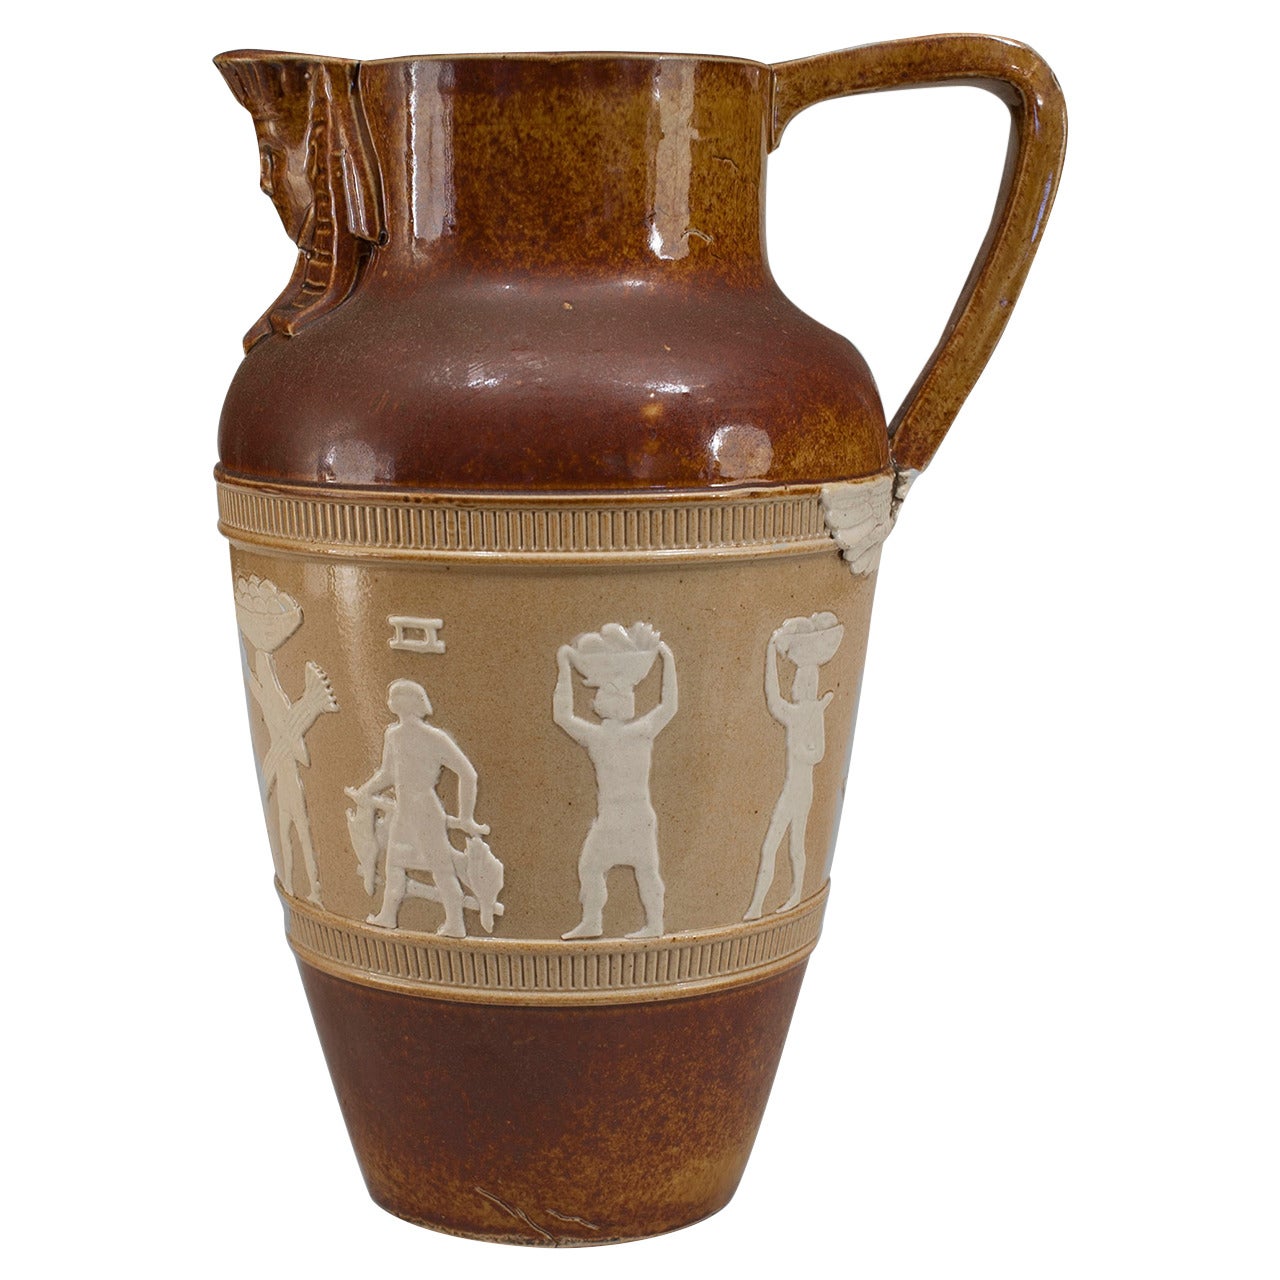 1920s English Egyptian Revival Pitcher by Doulton